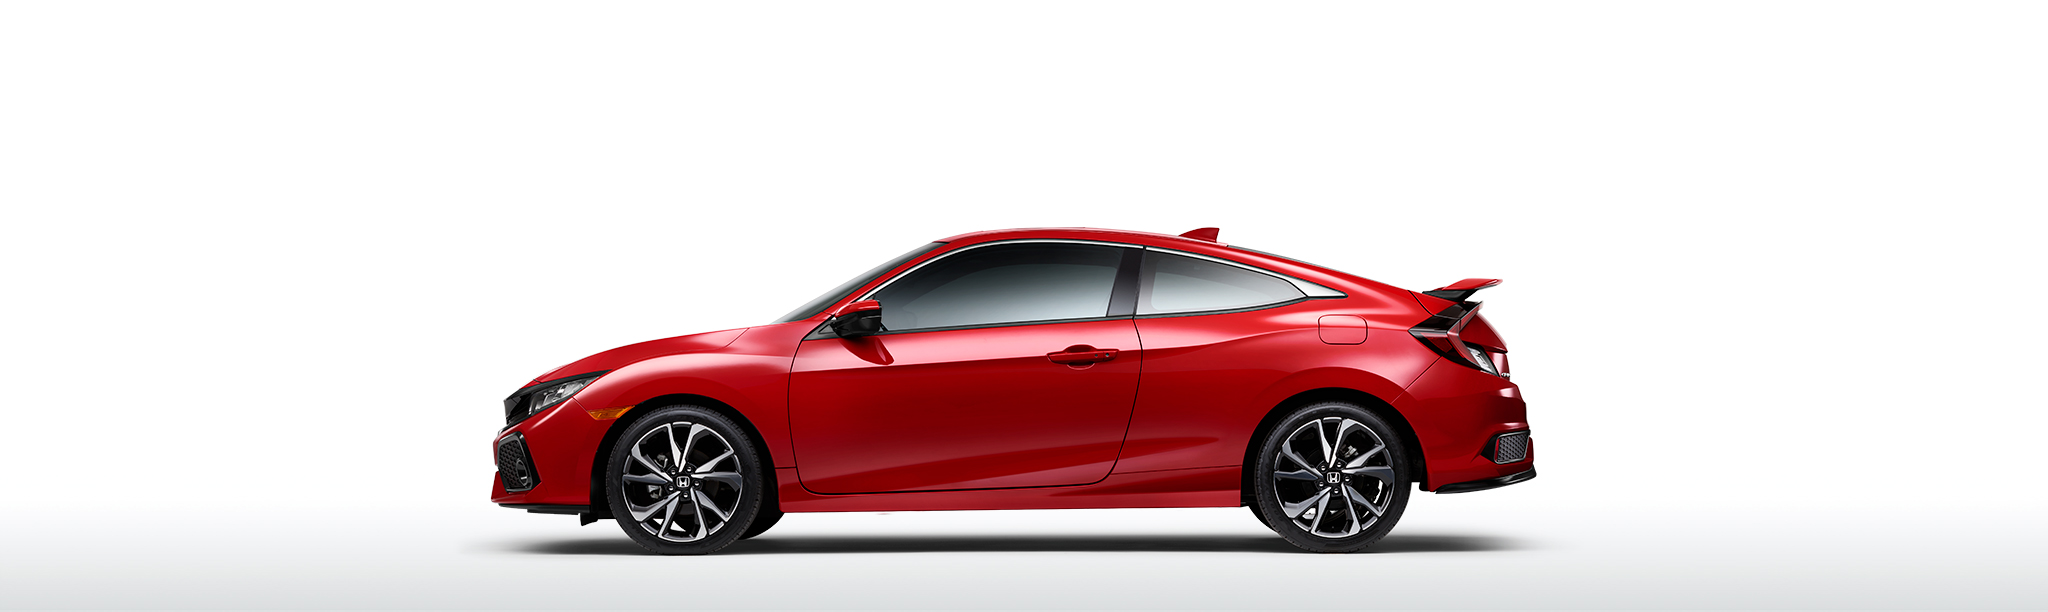 civic-coupe-ext-pano-bg-tablet